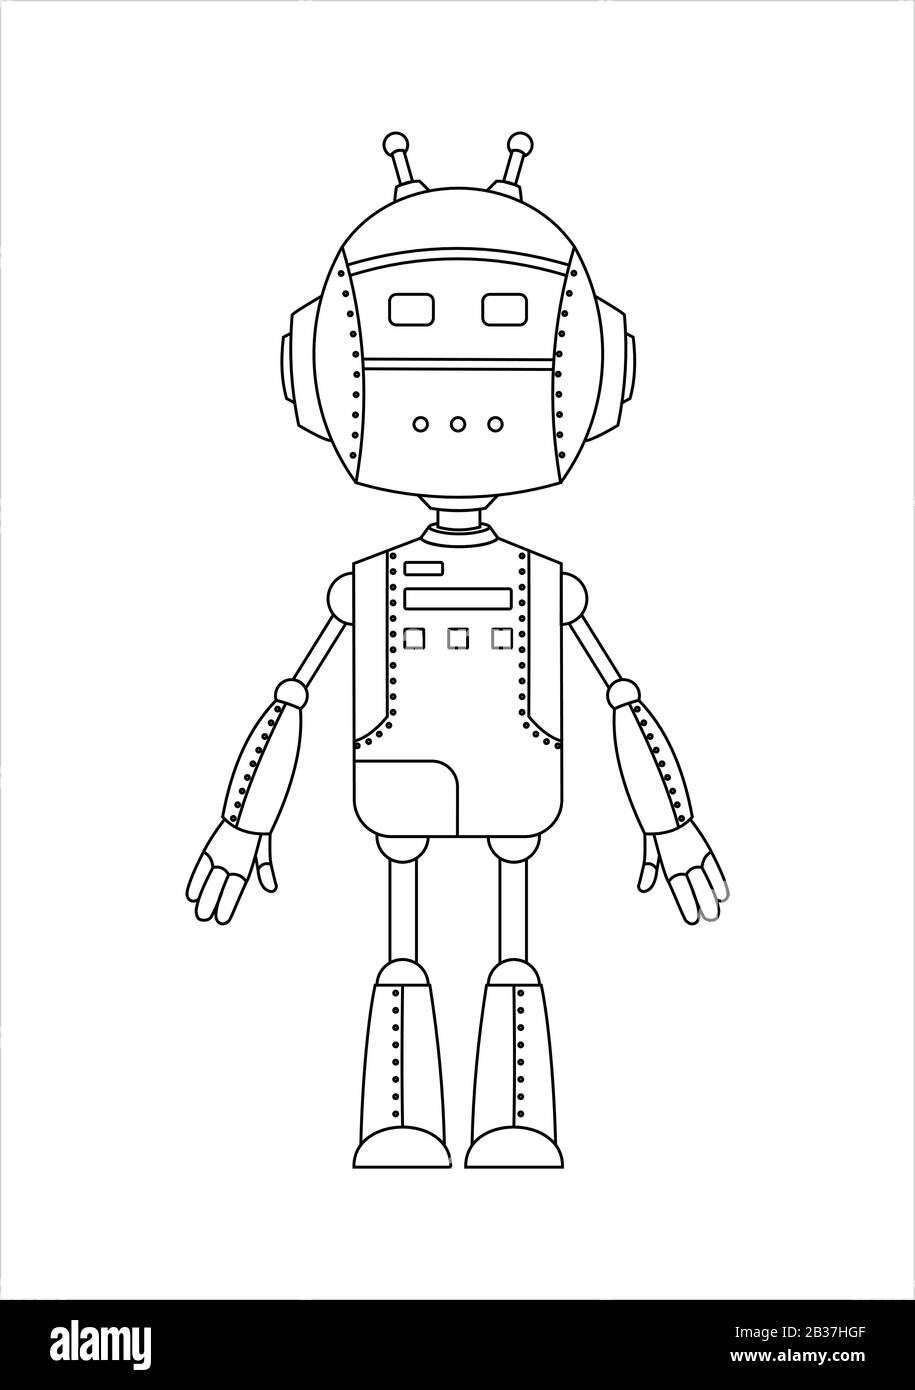 https://c8.alamy.com/comp/2B37HGF/outline-friendly-android-robot-character-with-two-antennas-2B37HGF.jpg